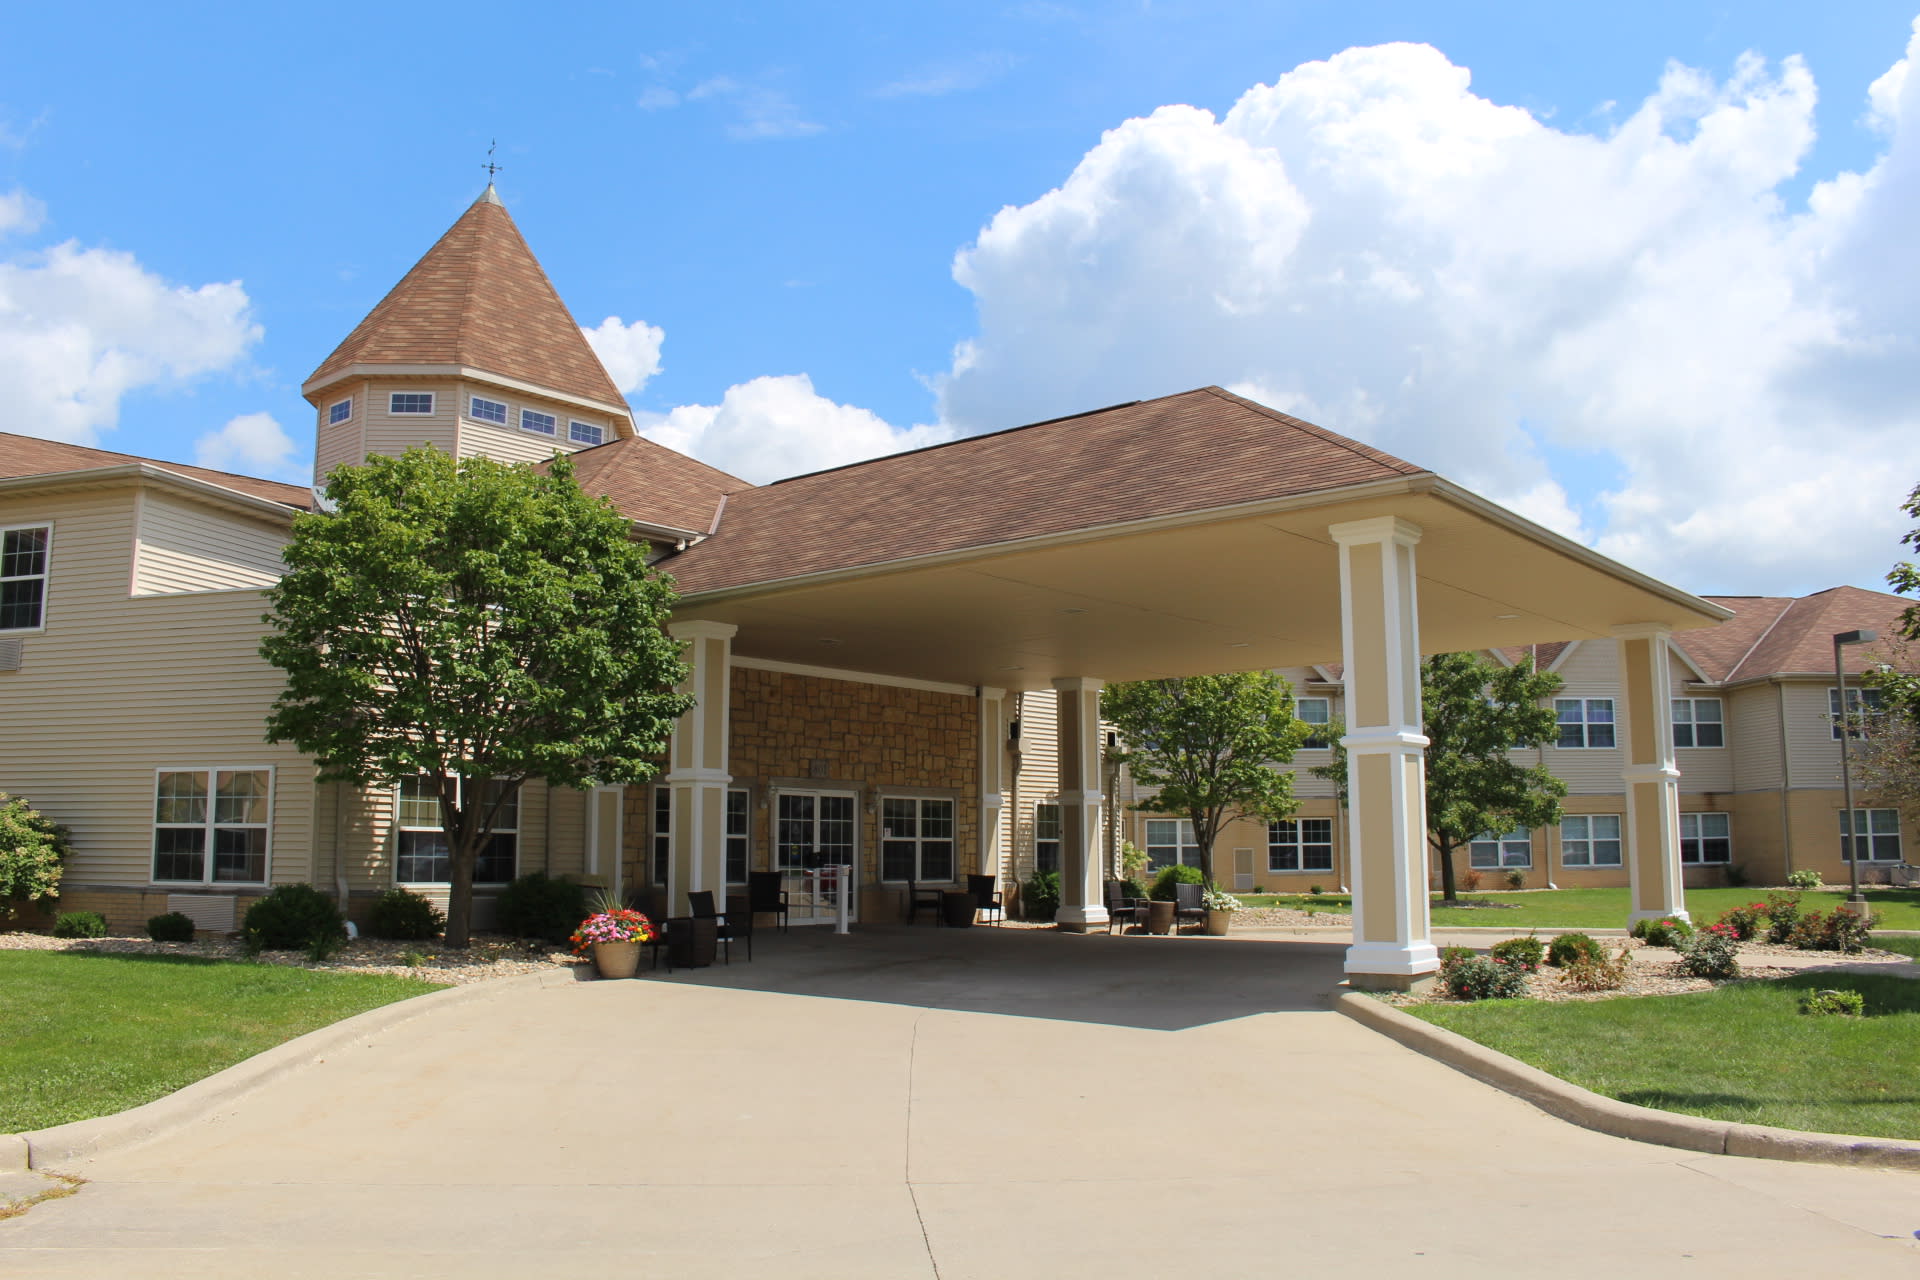 Evergreen Place Assisted Living community exterior